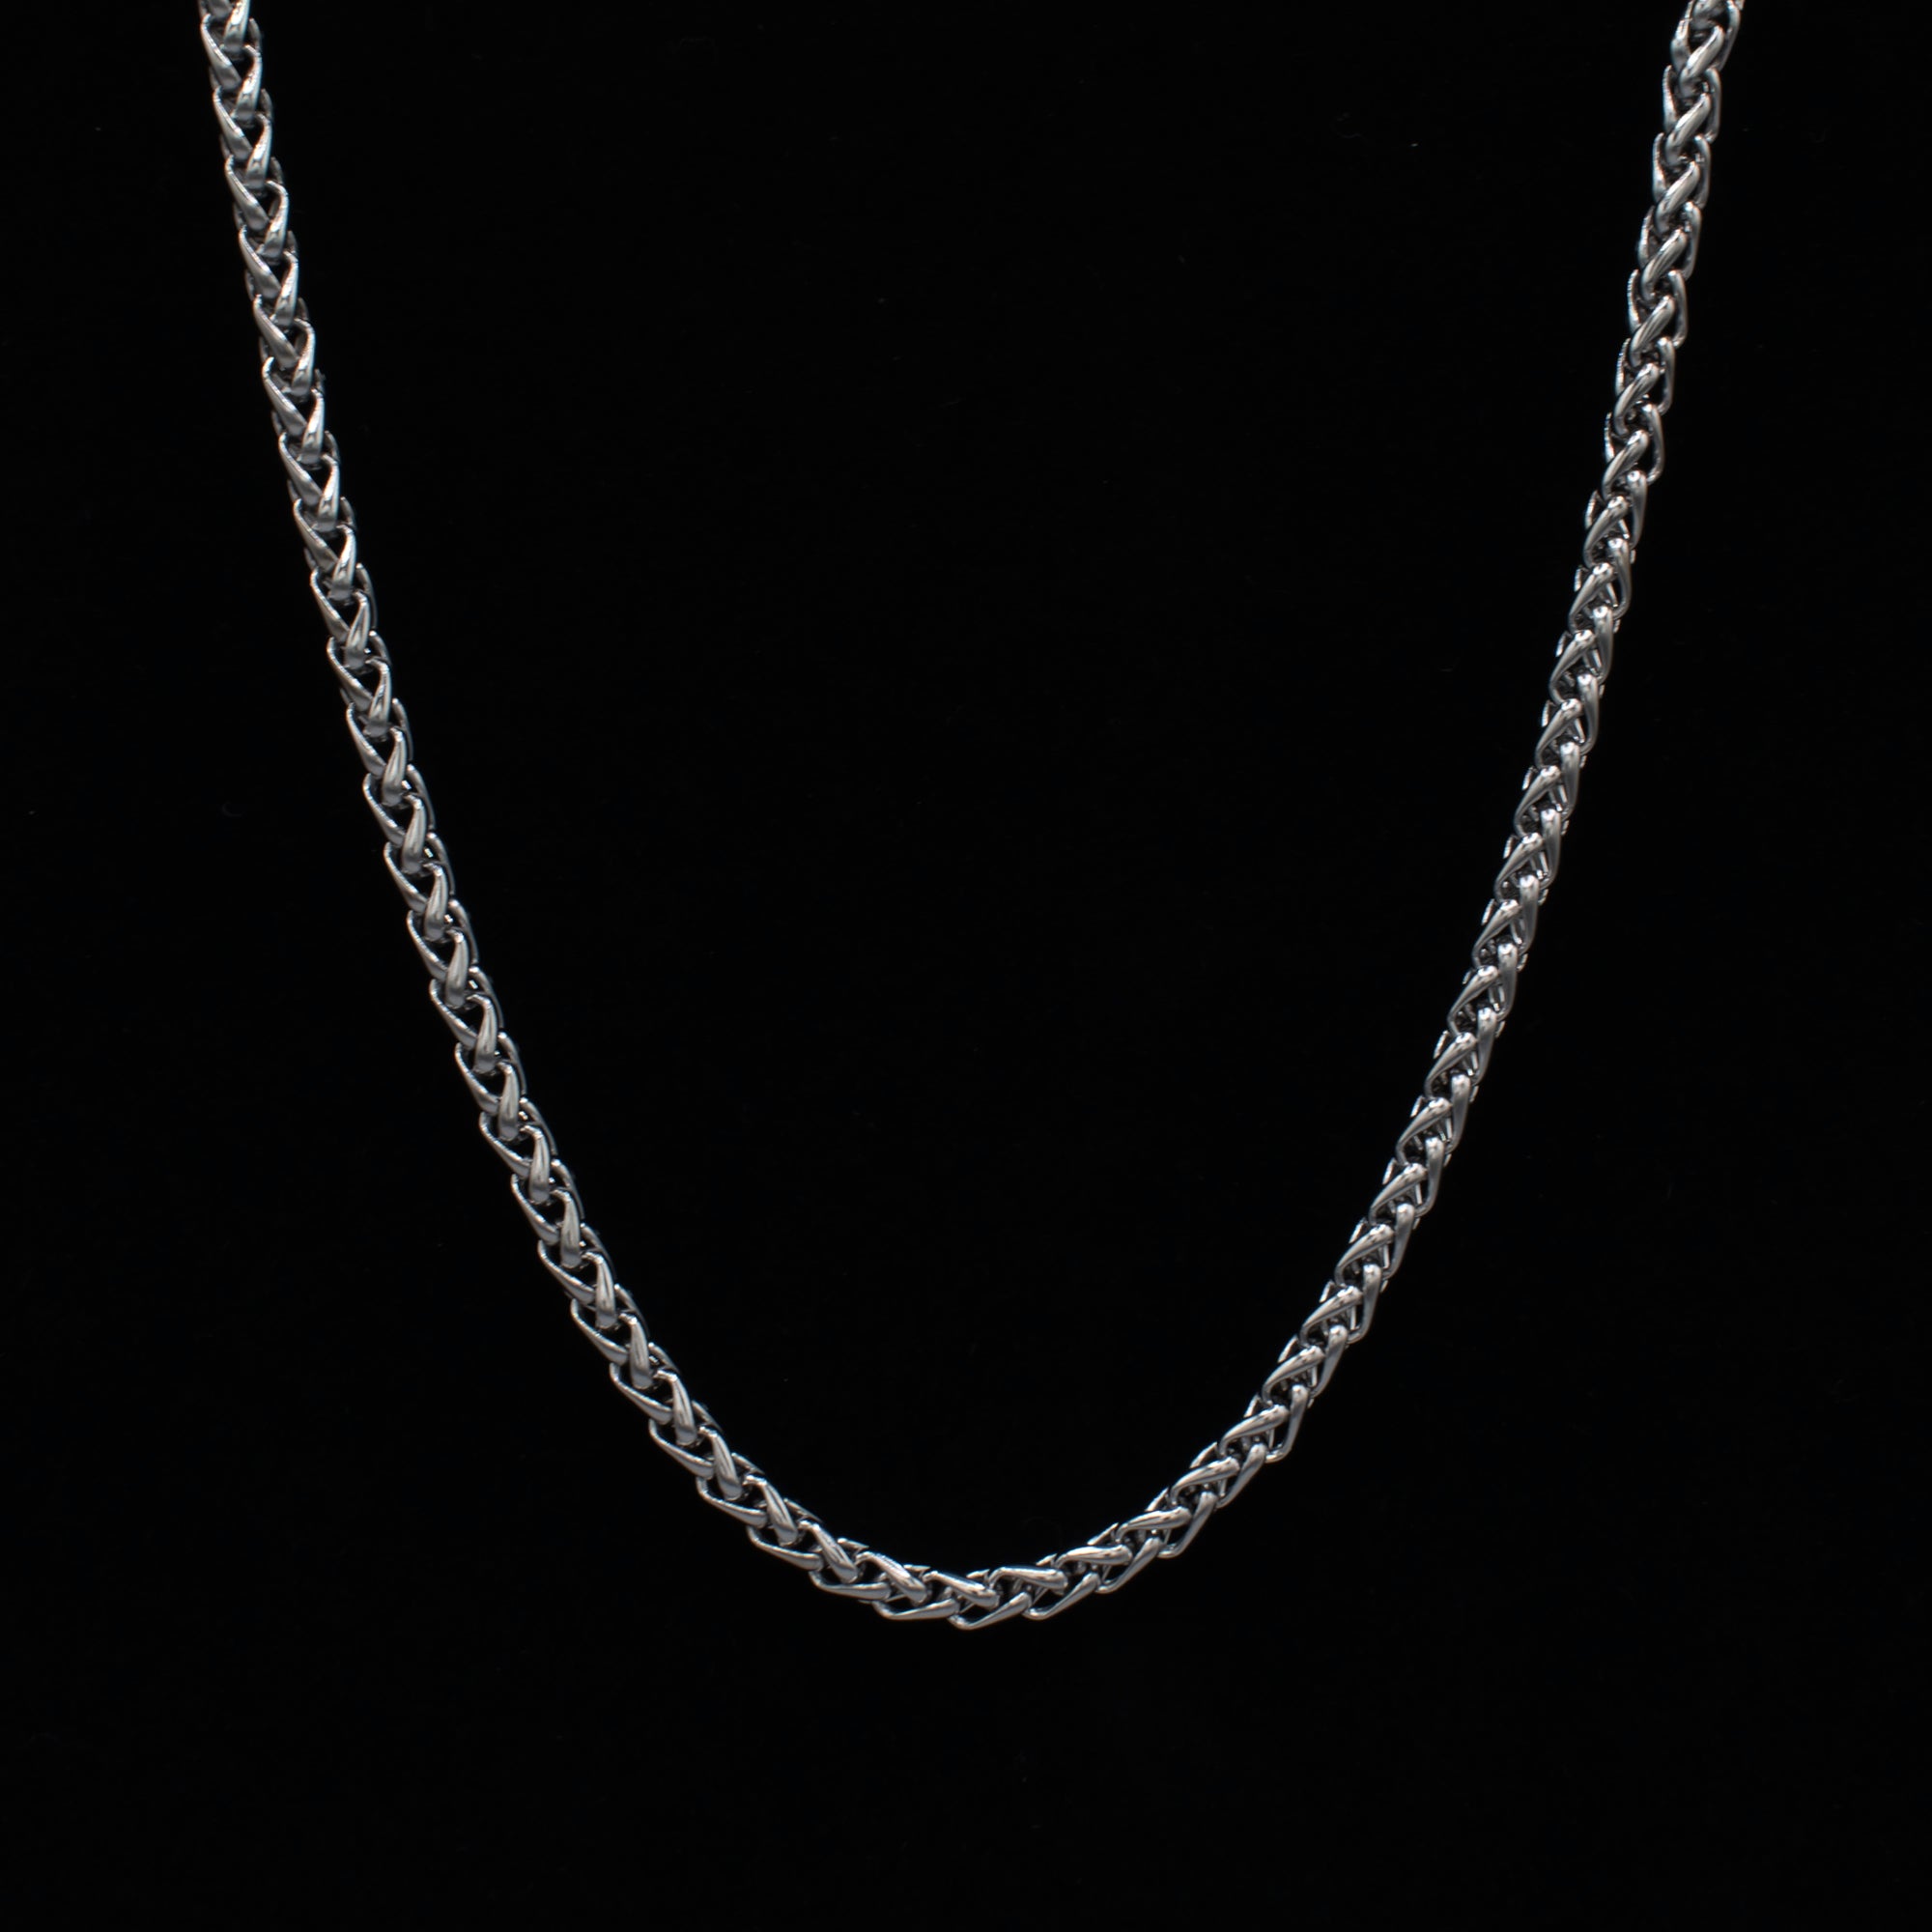 Foxtail Necklace - (Silver) 5mm